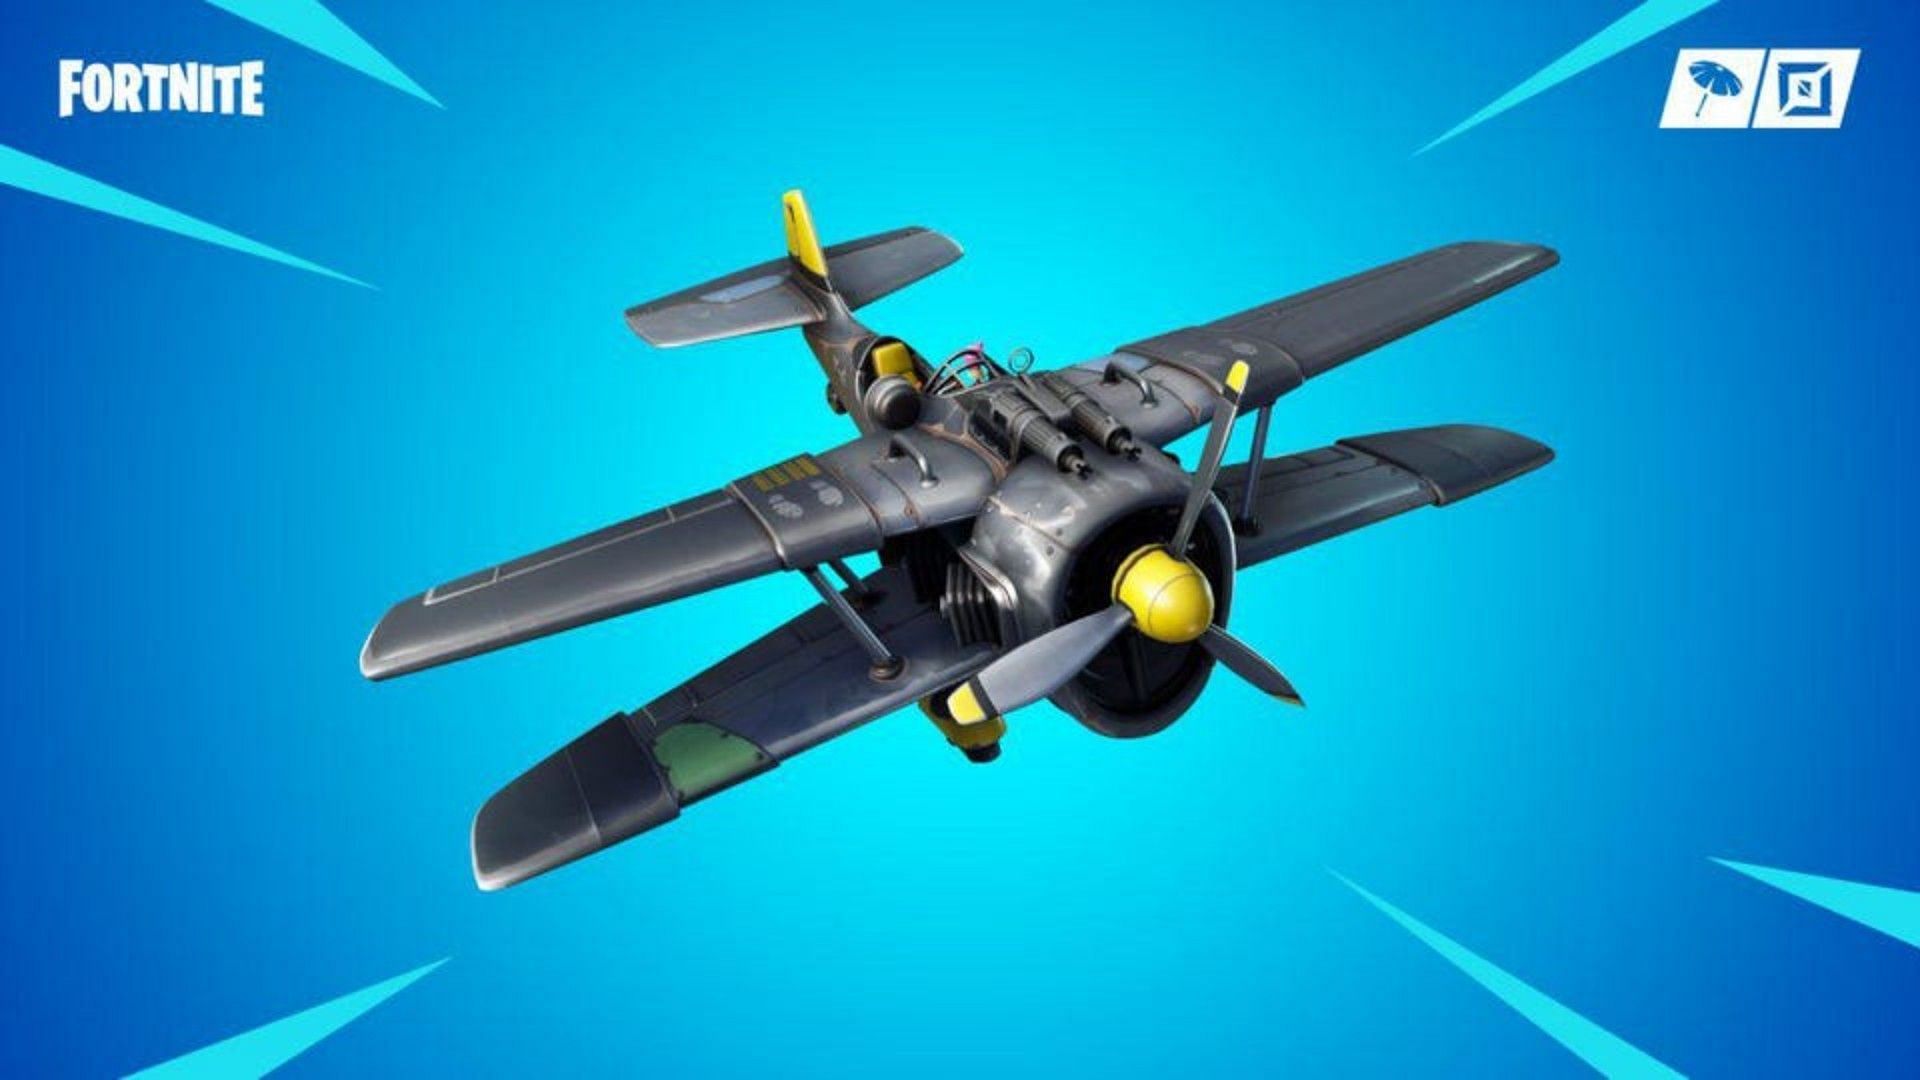 Fortnite players might soon be able to go airborne (Image via Epic Games)